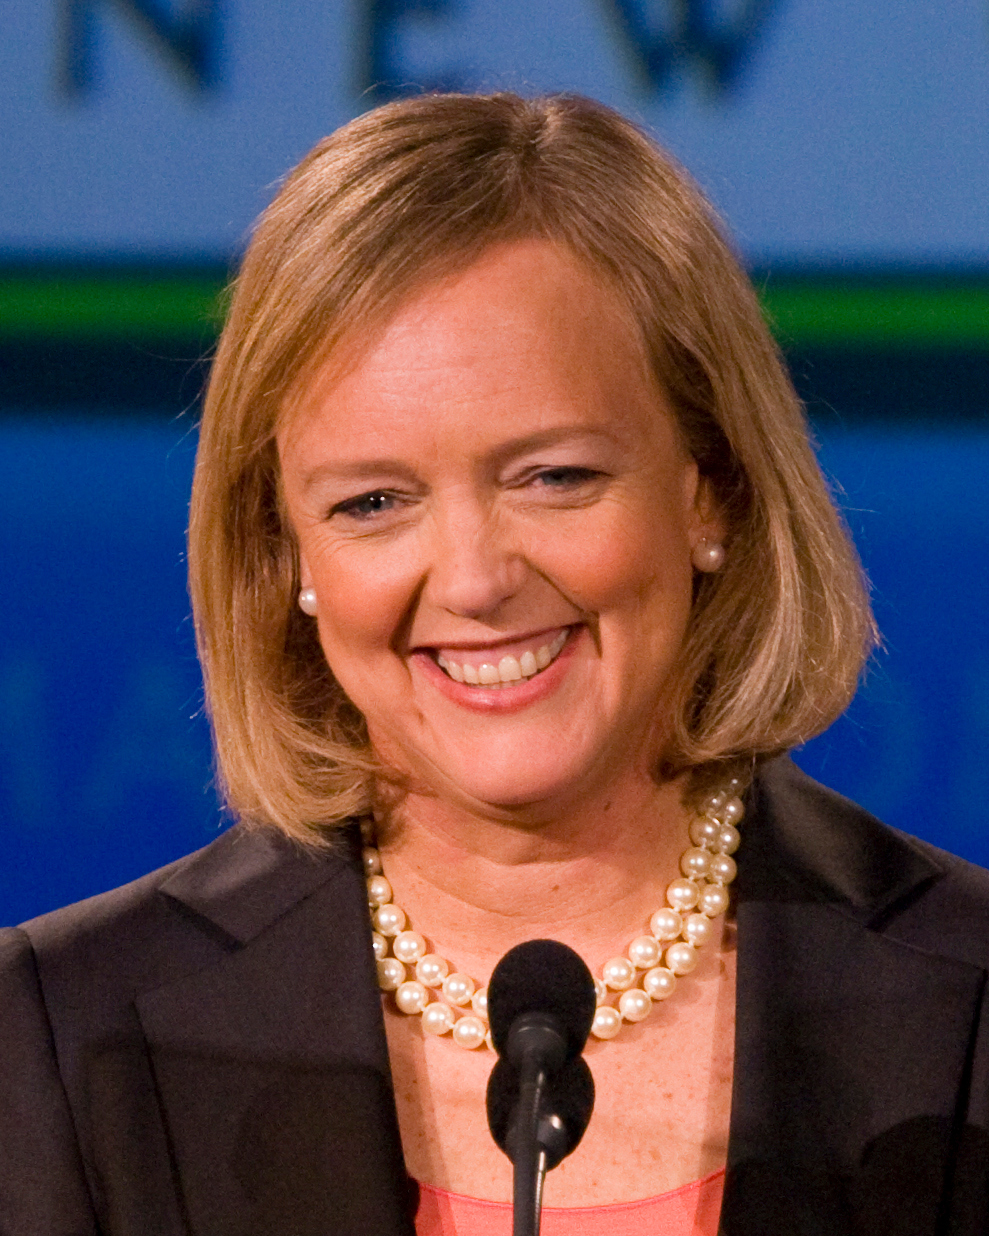 Republican Fundraising Giant, Meg Whitman Has Cast Her Support for Clinton